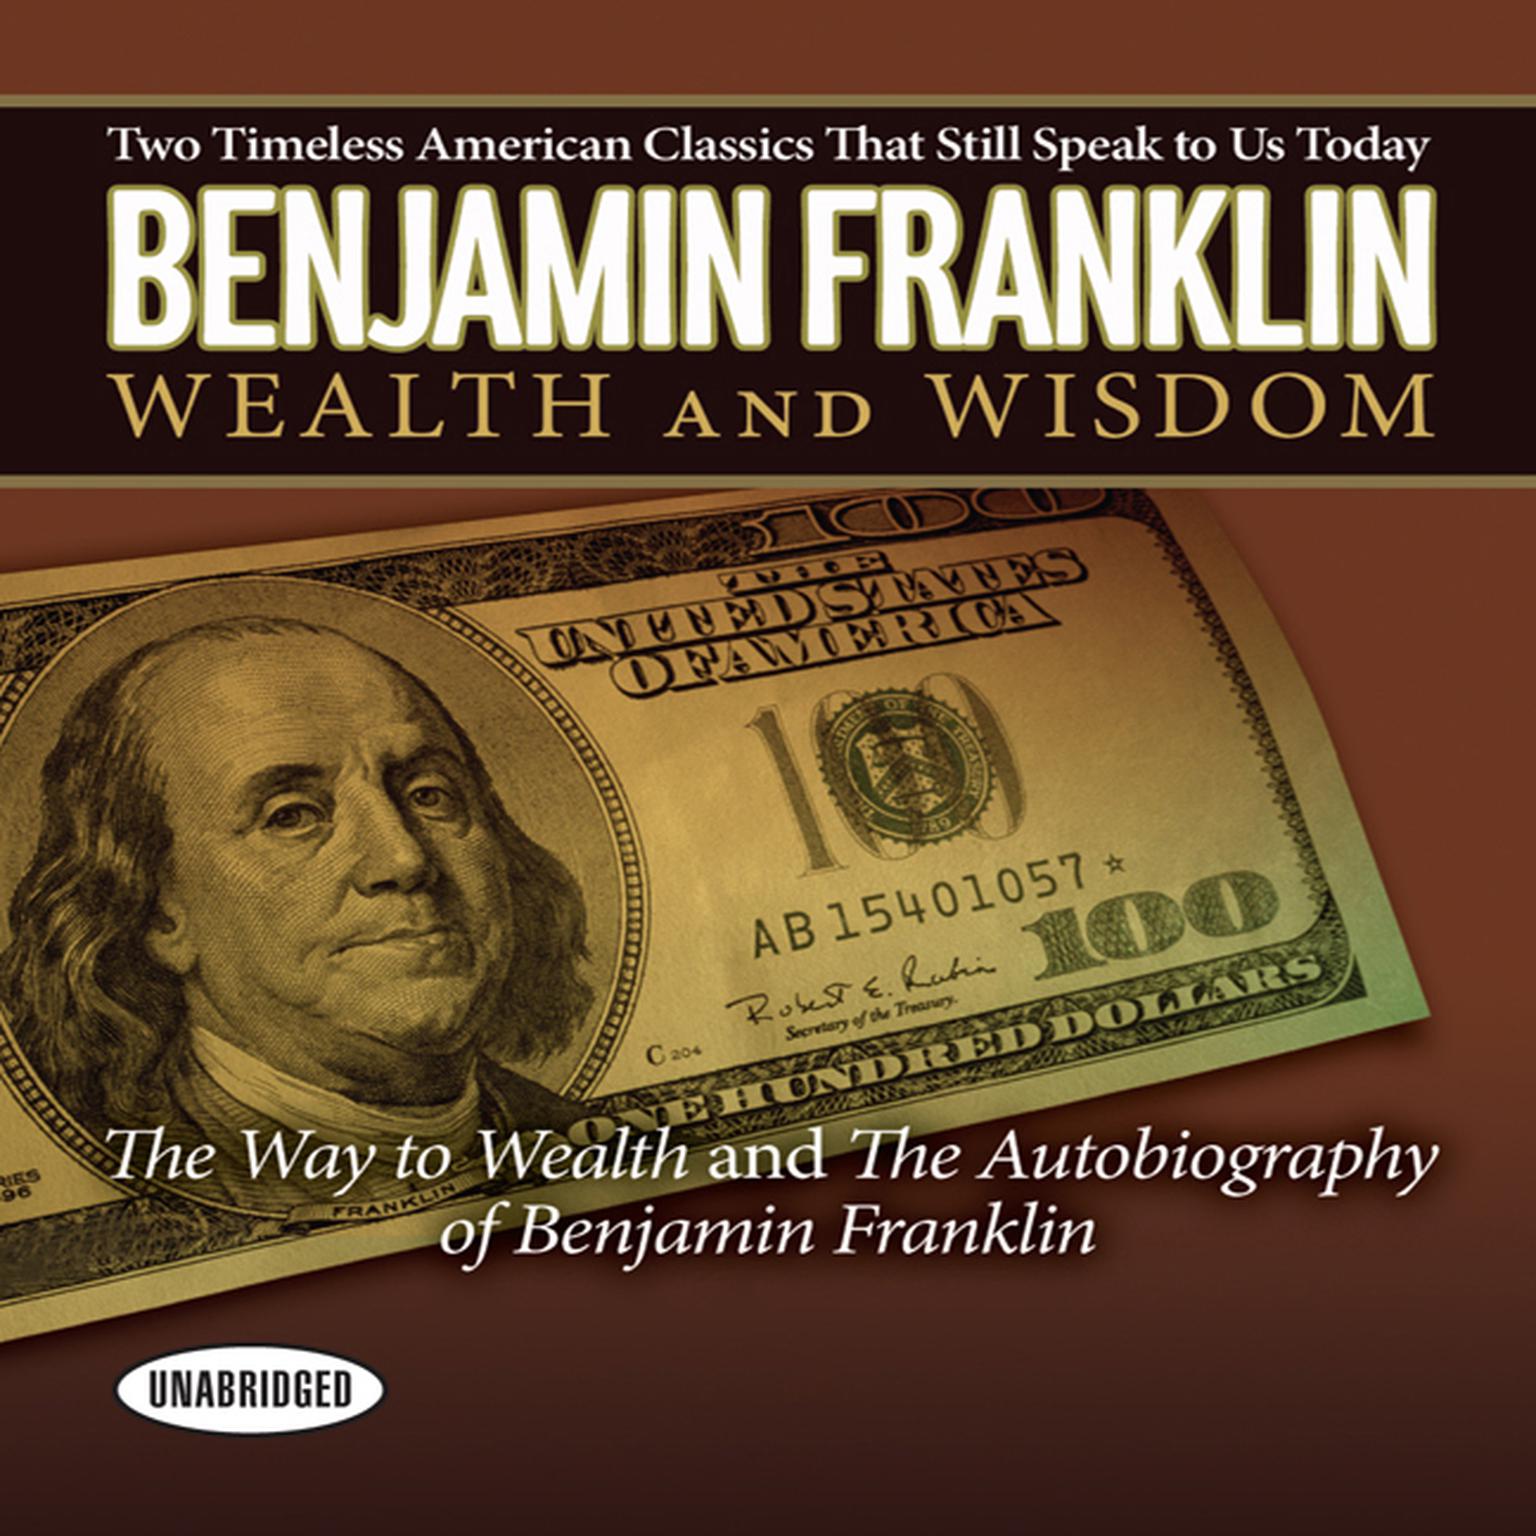 Benjamin Franklin Wealth and Wisdom: The Way to Wealth and The Autobiography of Benjamin Franklin: Two Timeless American Classics That Still Speak to Us Today Audiobook, by Benjamin Franklin